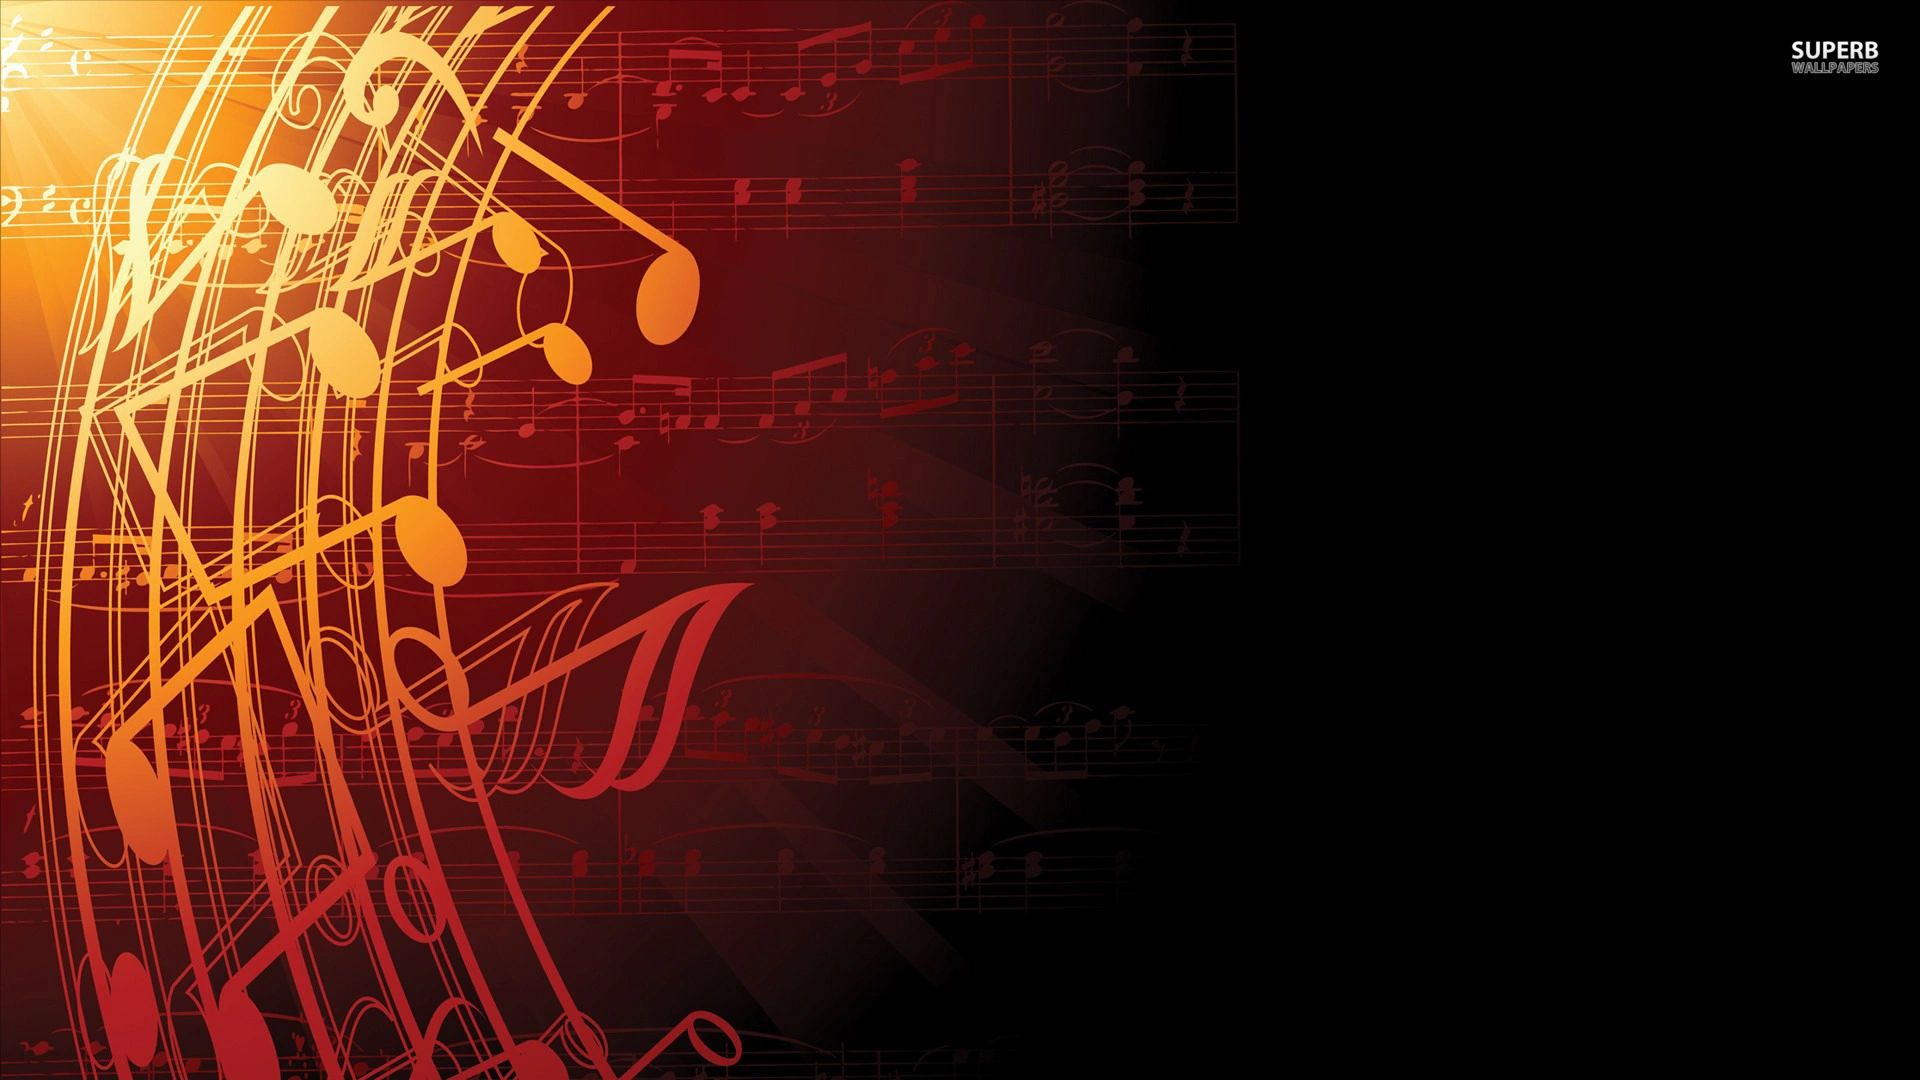 hd music notes backgrounds